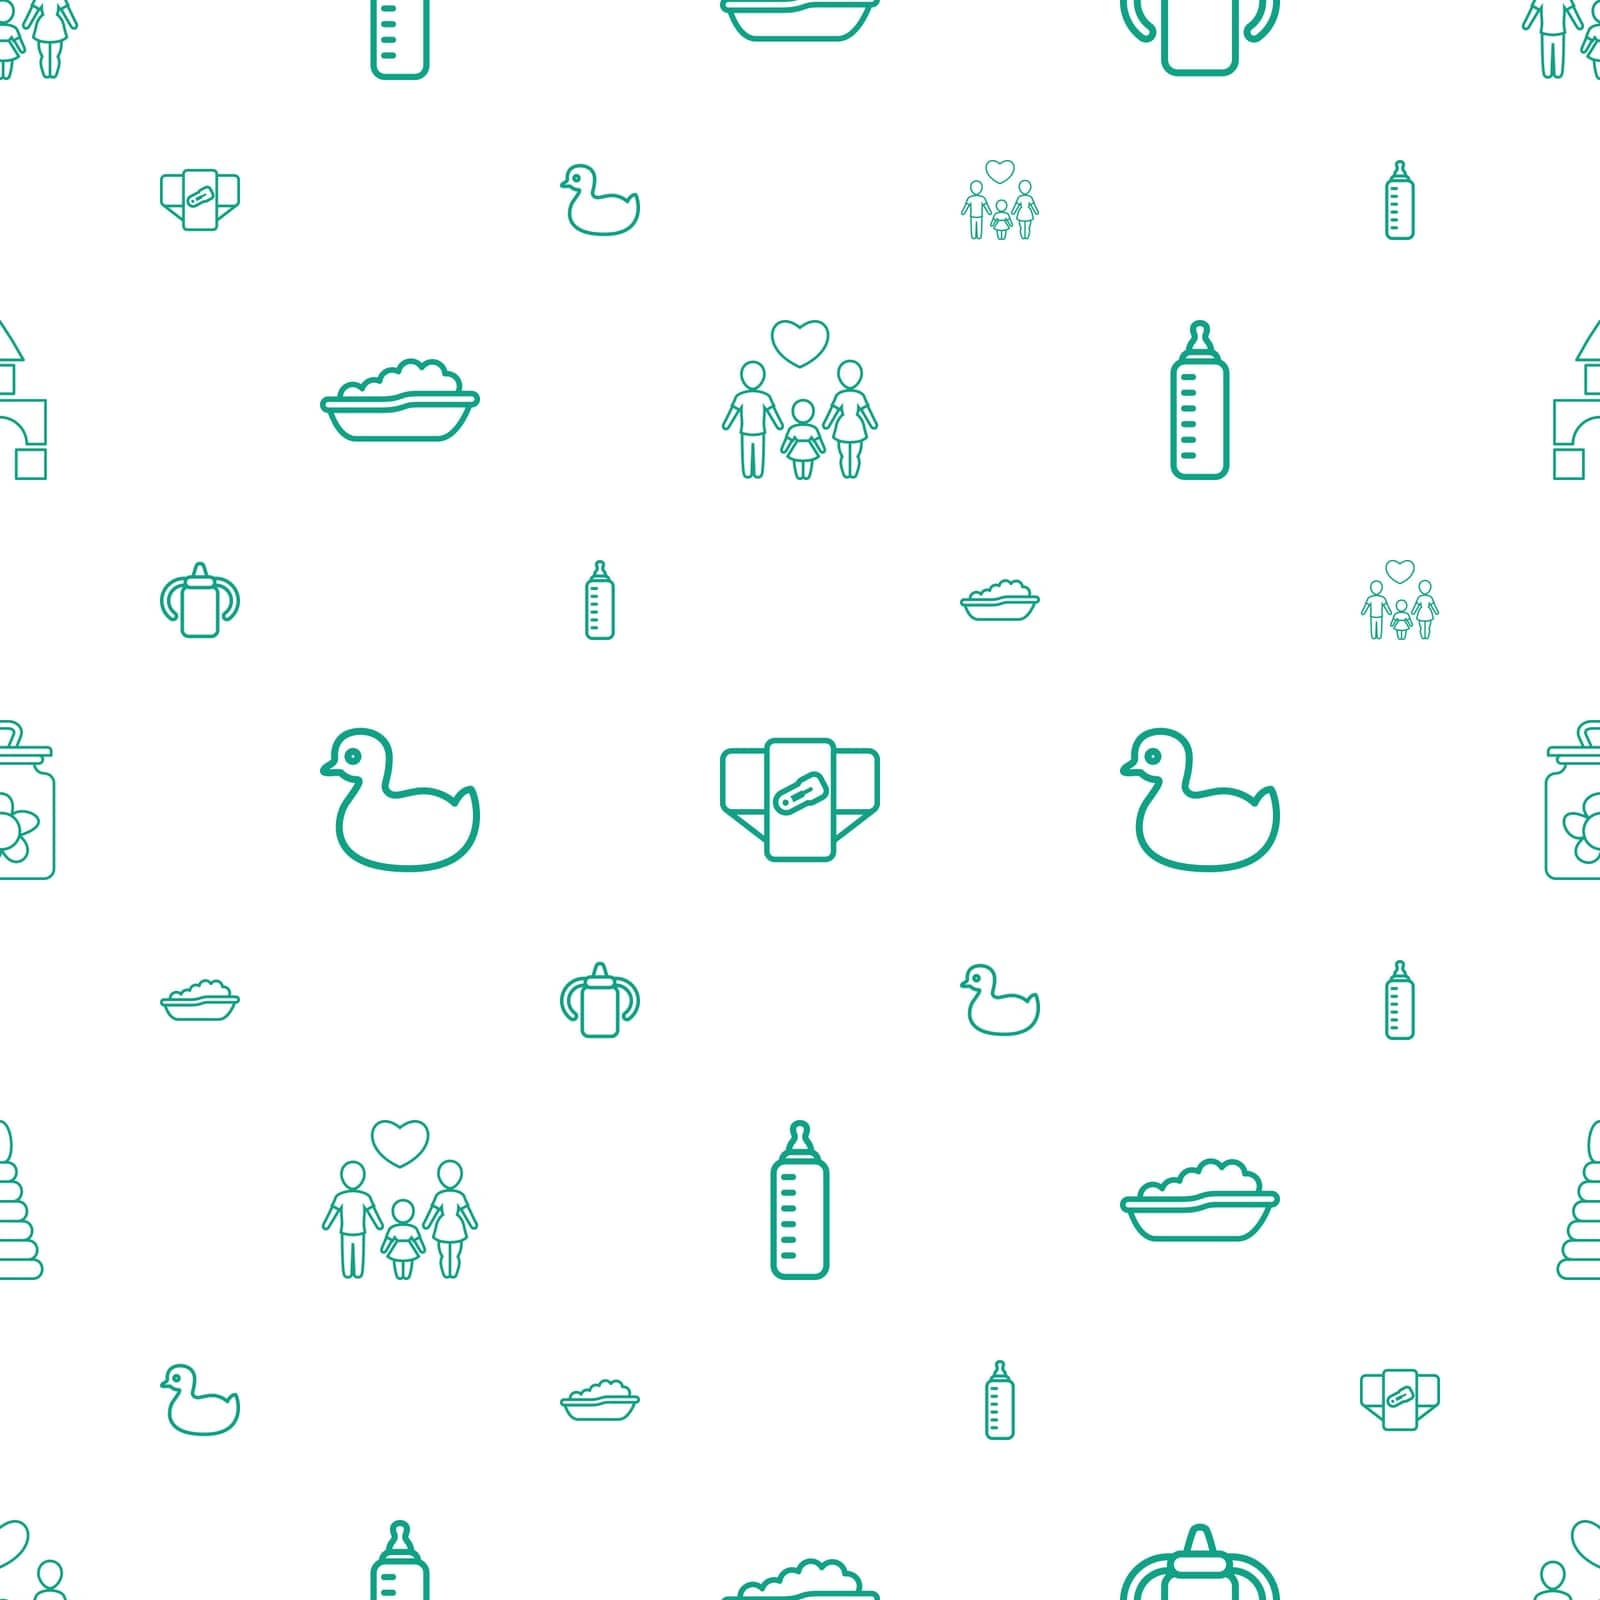 play,symbol,game,nipple,happy,kid,concept,pattern,icon,sign,isolated,bottle,youth,toddler,white,flat,duck,design,block,vector,nobody,bath,graphic,tower,element,toy,shape,childhood,plastic,blue,background,baby,pyramid,illustration,diaper,family,fun,object,child by ogqcorp